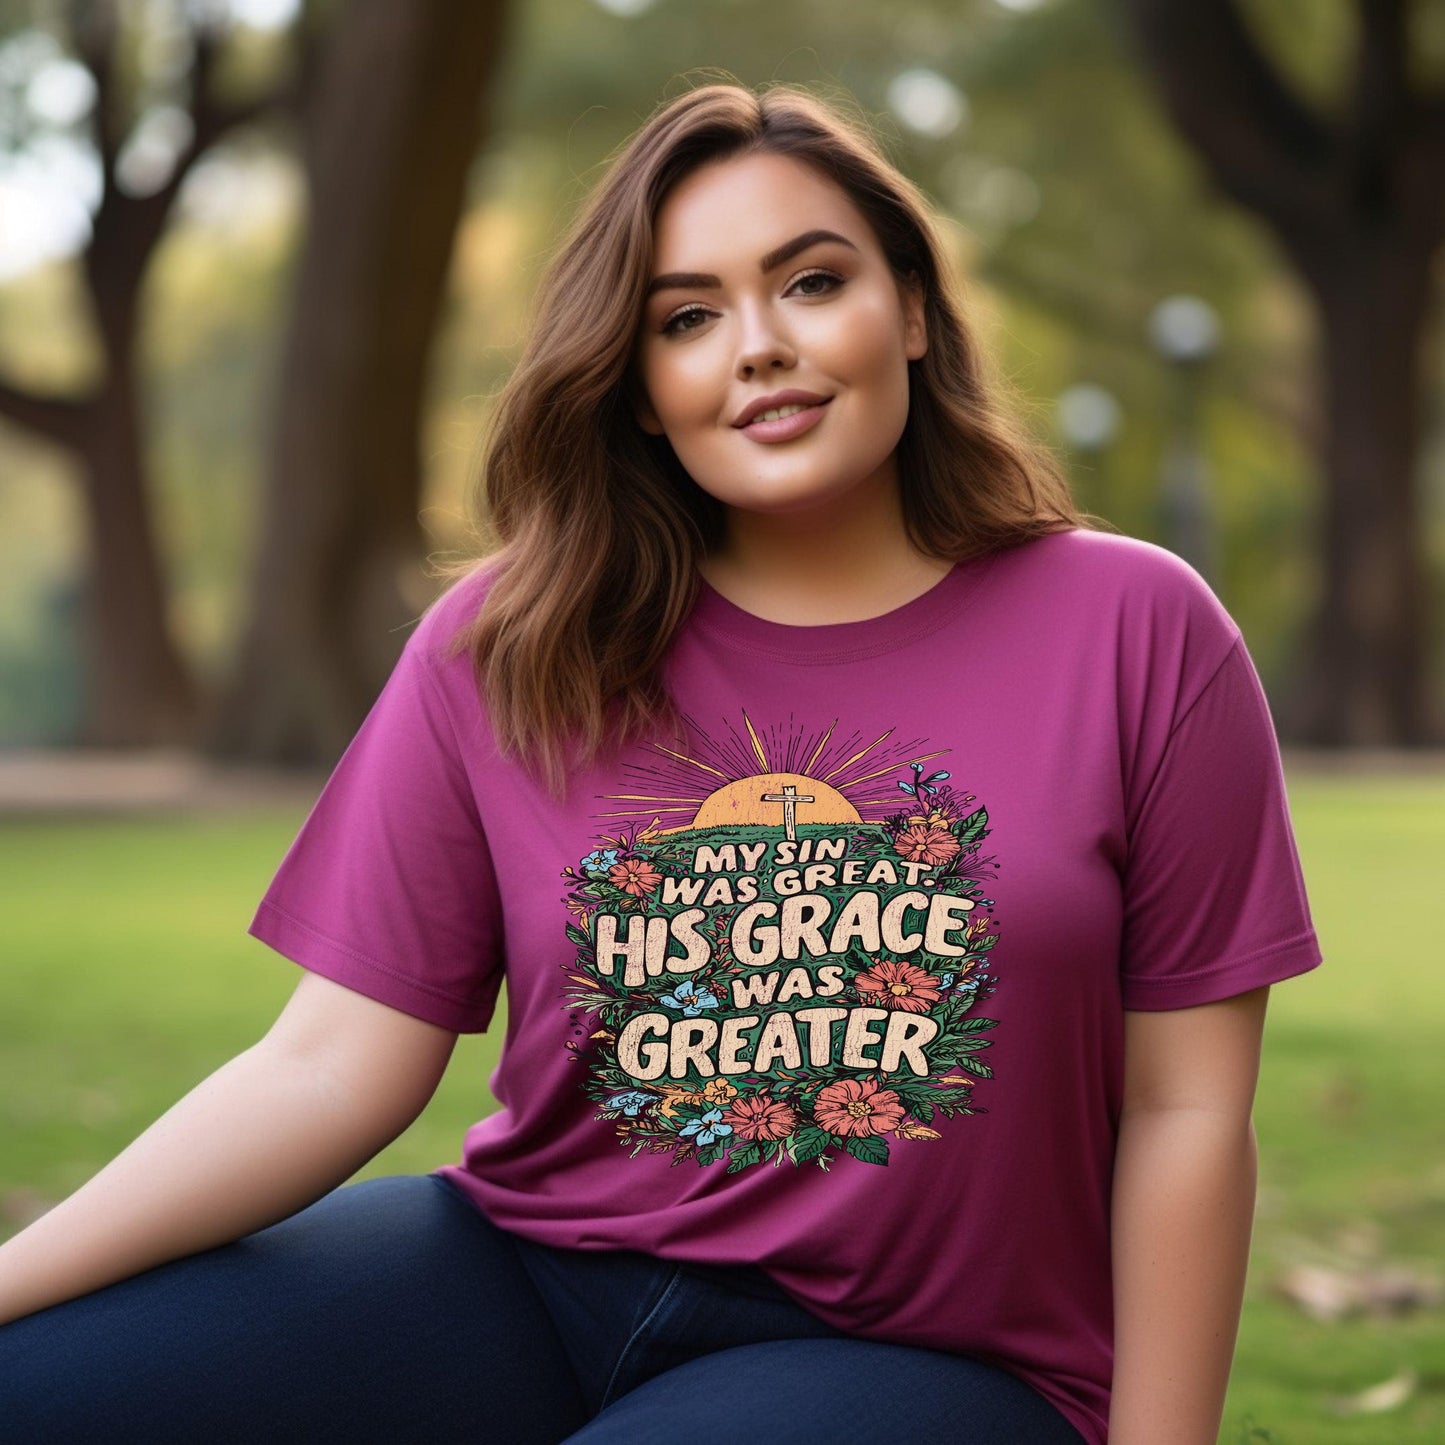 My Sin Was Great But His Grace Was Greater Women’s Plus Tee - JT Footprint Apparel